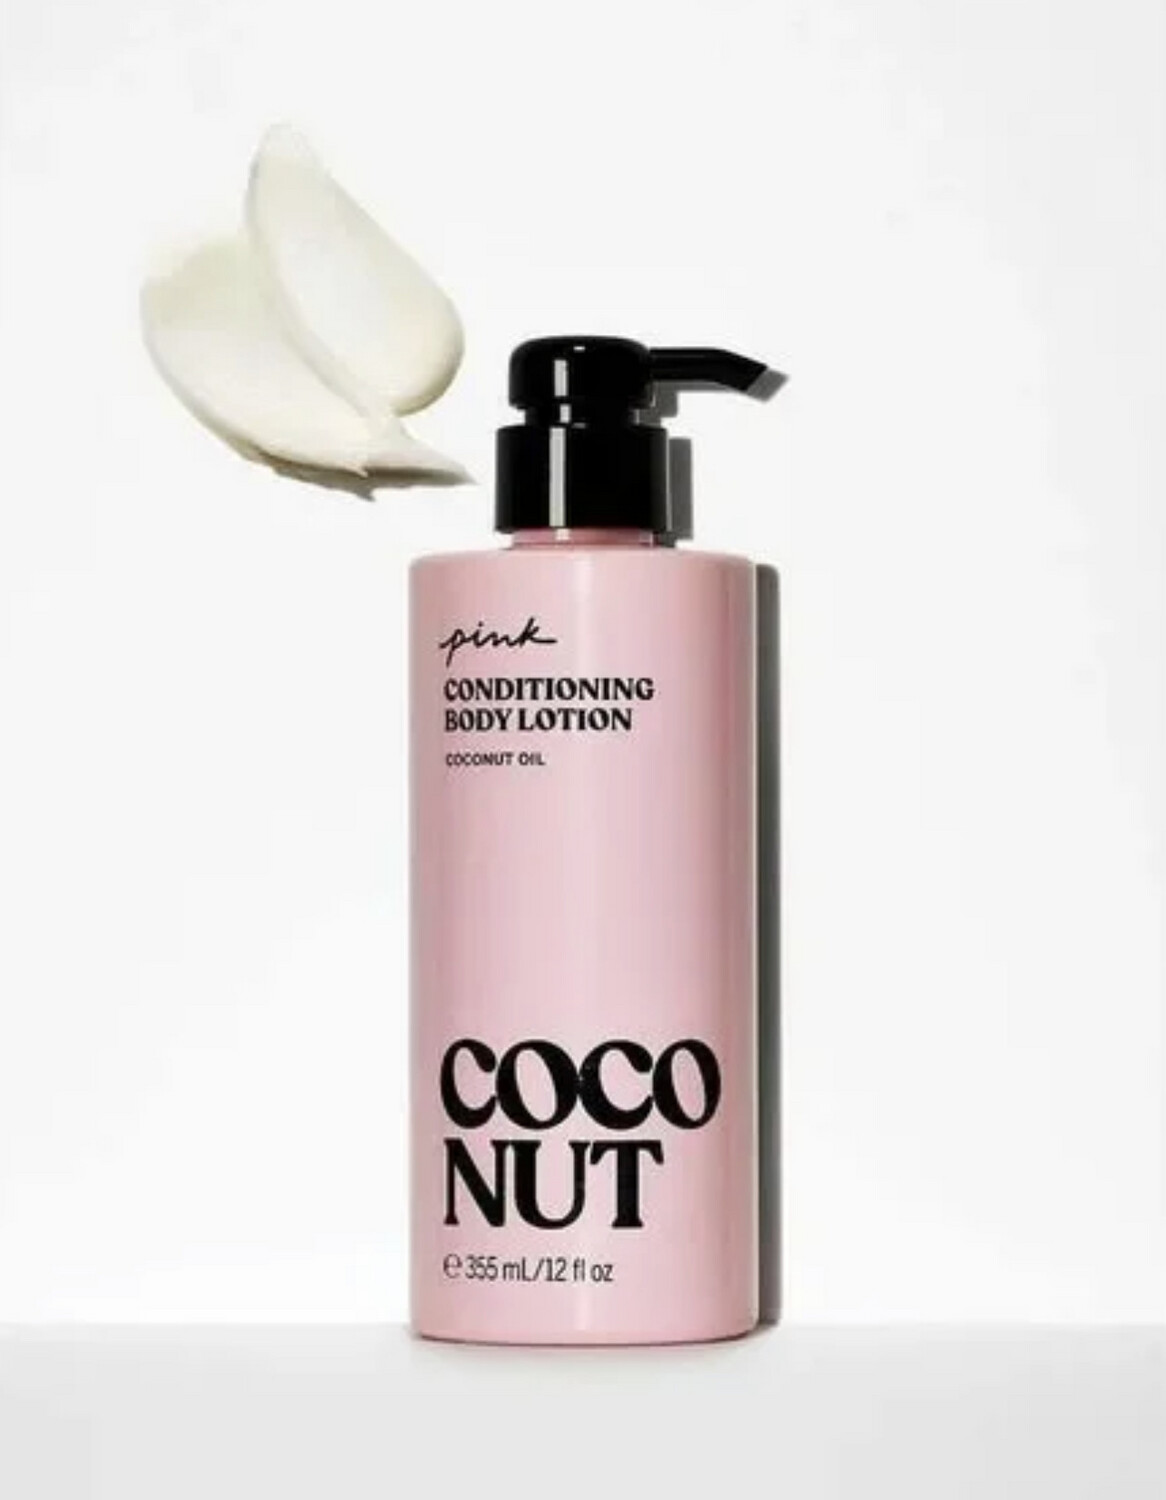 Victoria’s Secret - Coco Lotion Hydrating Body Lotion with Coconut Oil